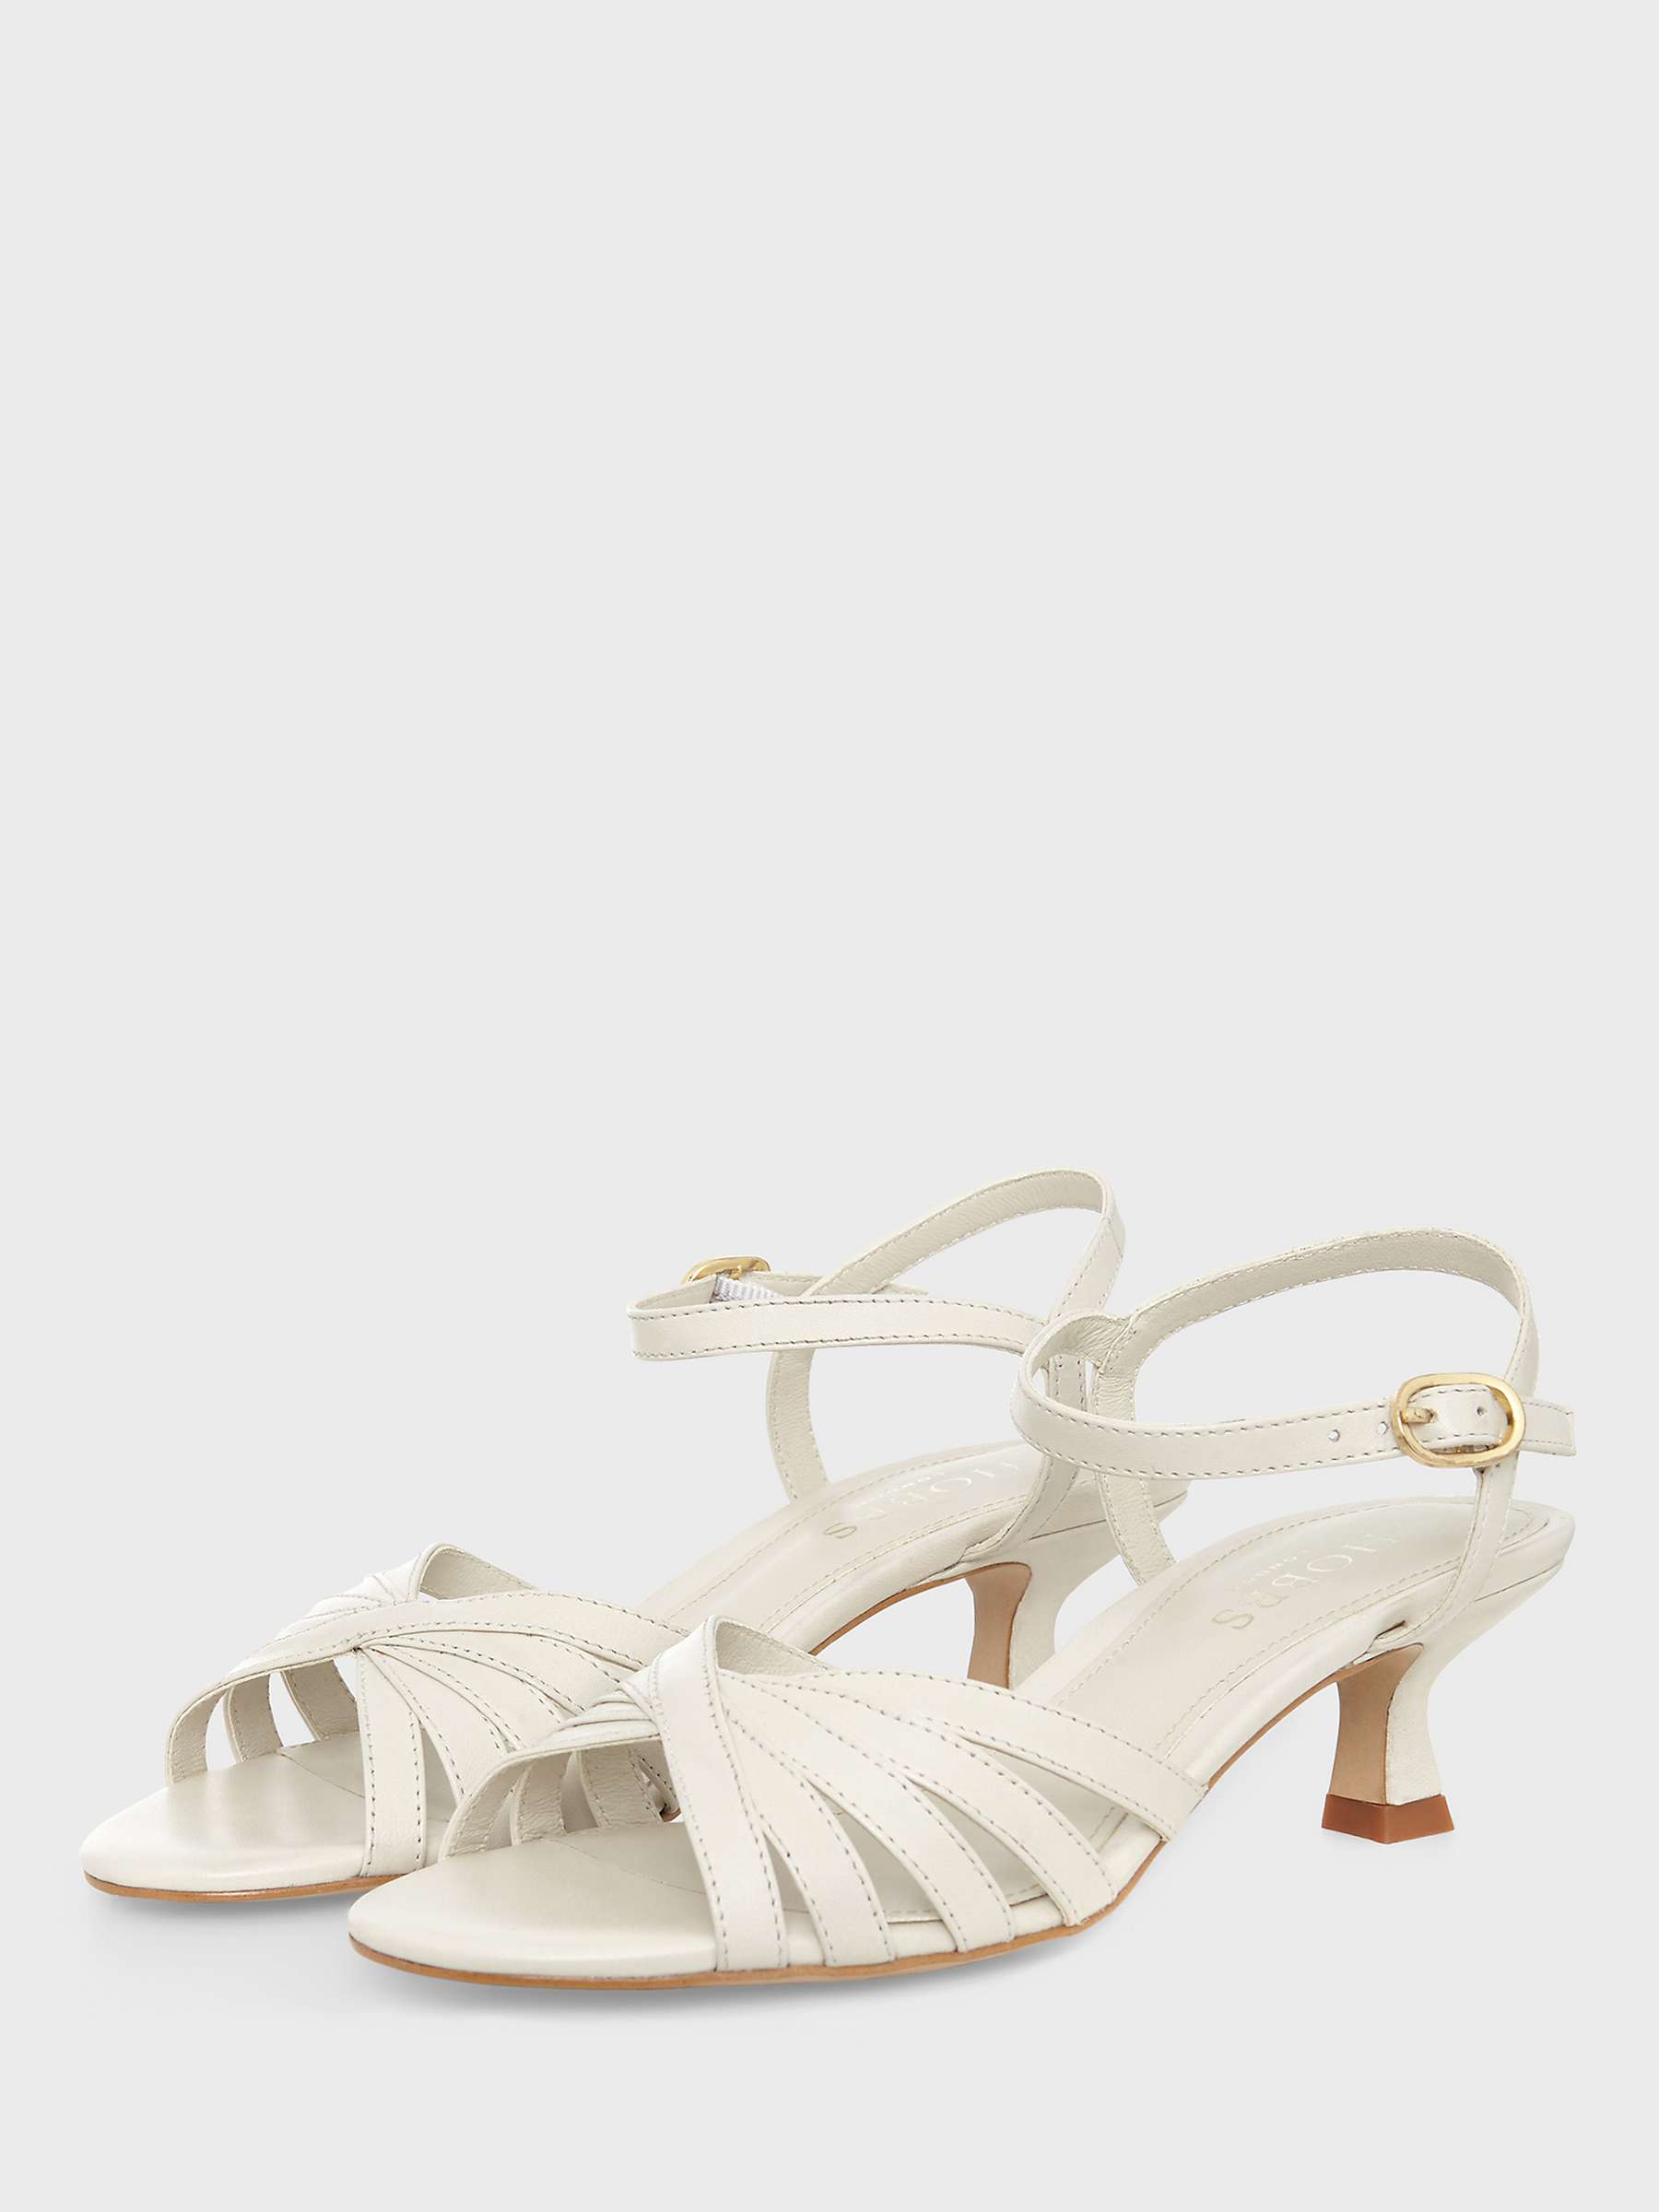 Buy Hobbs Lacey Leather Sandals, Ivory Online at johnlewis.com